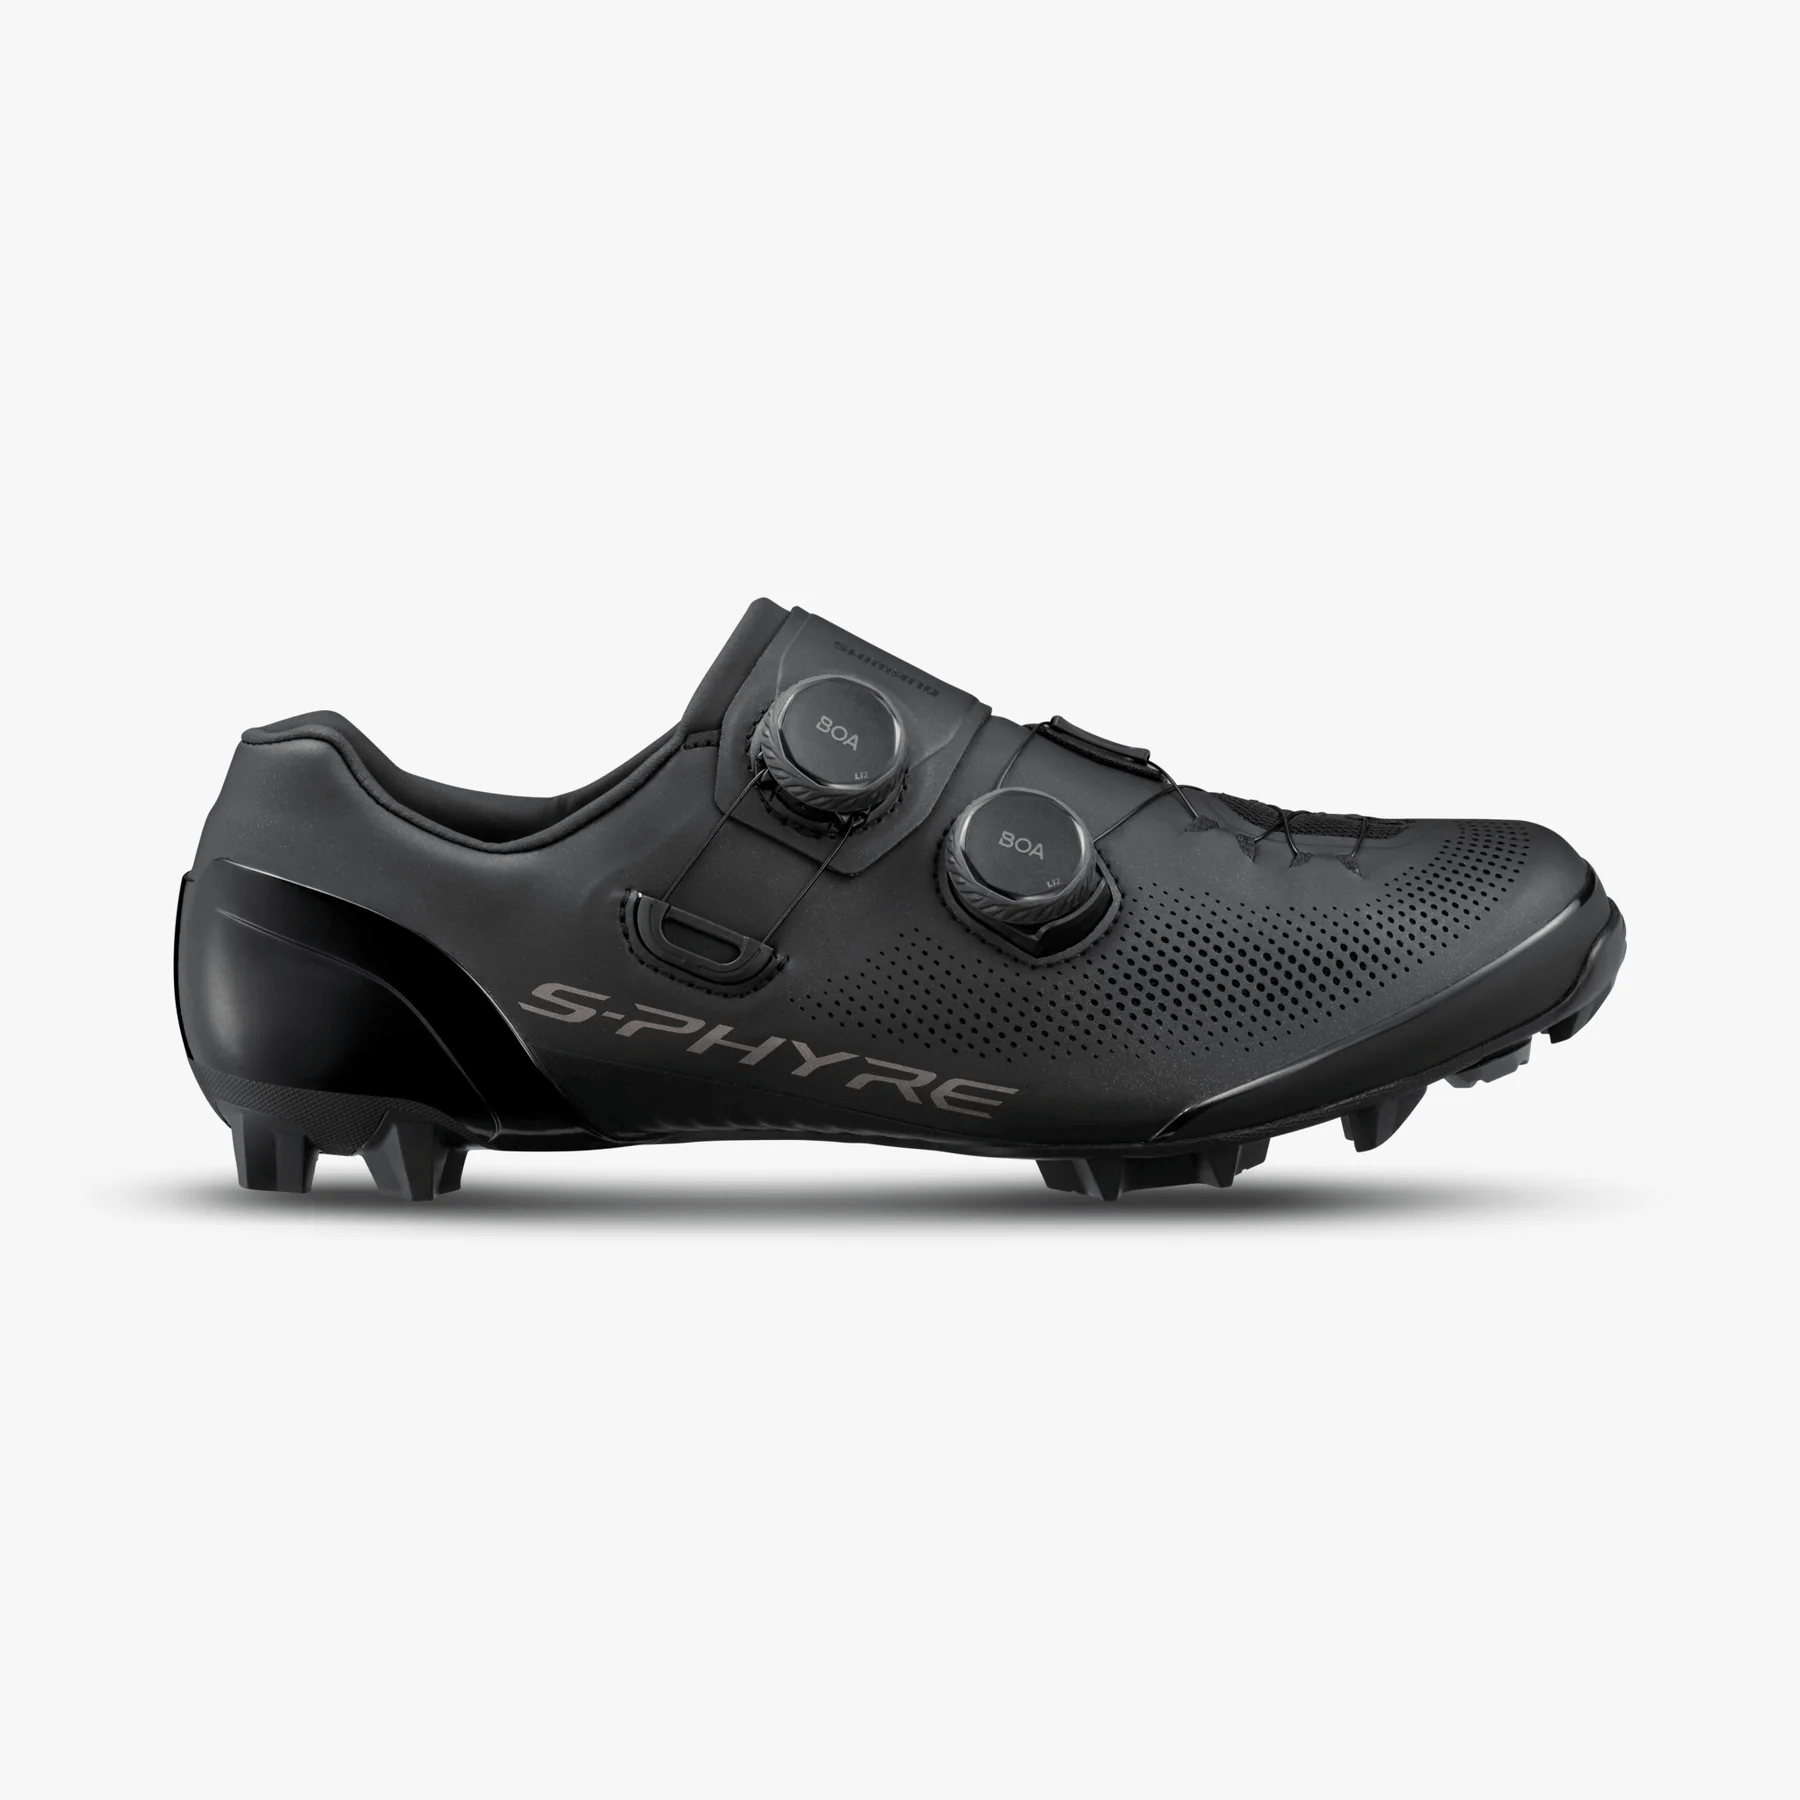 Shimano S-PHYRE SH-XC903 Shoe Black / 37 Apparel - Apparel Accessories - Shoes - Mountain - Clip-in